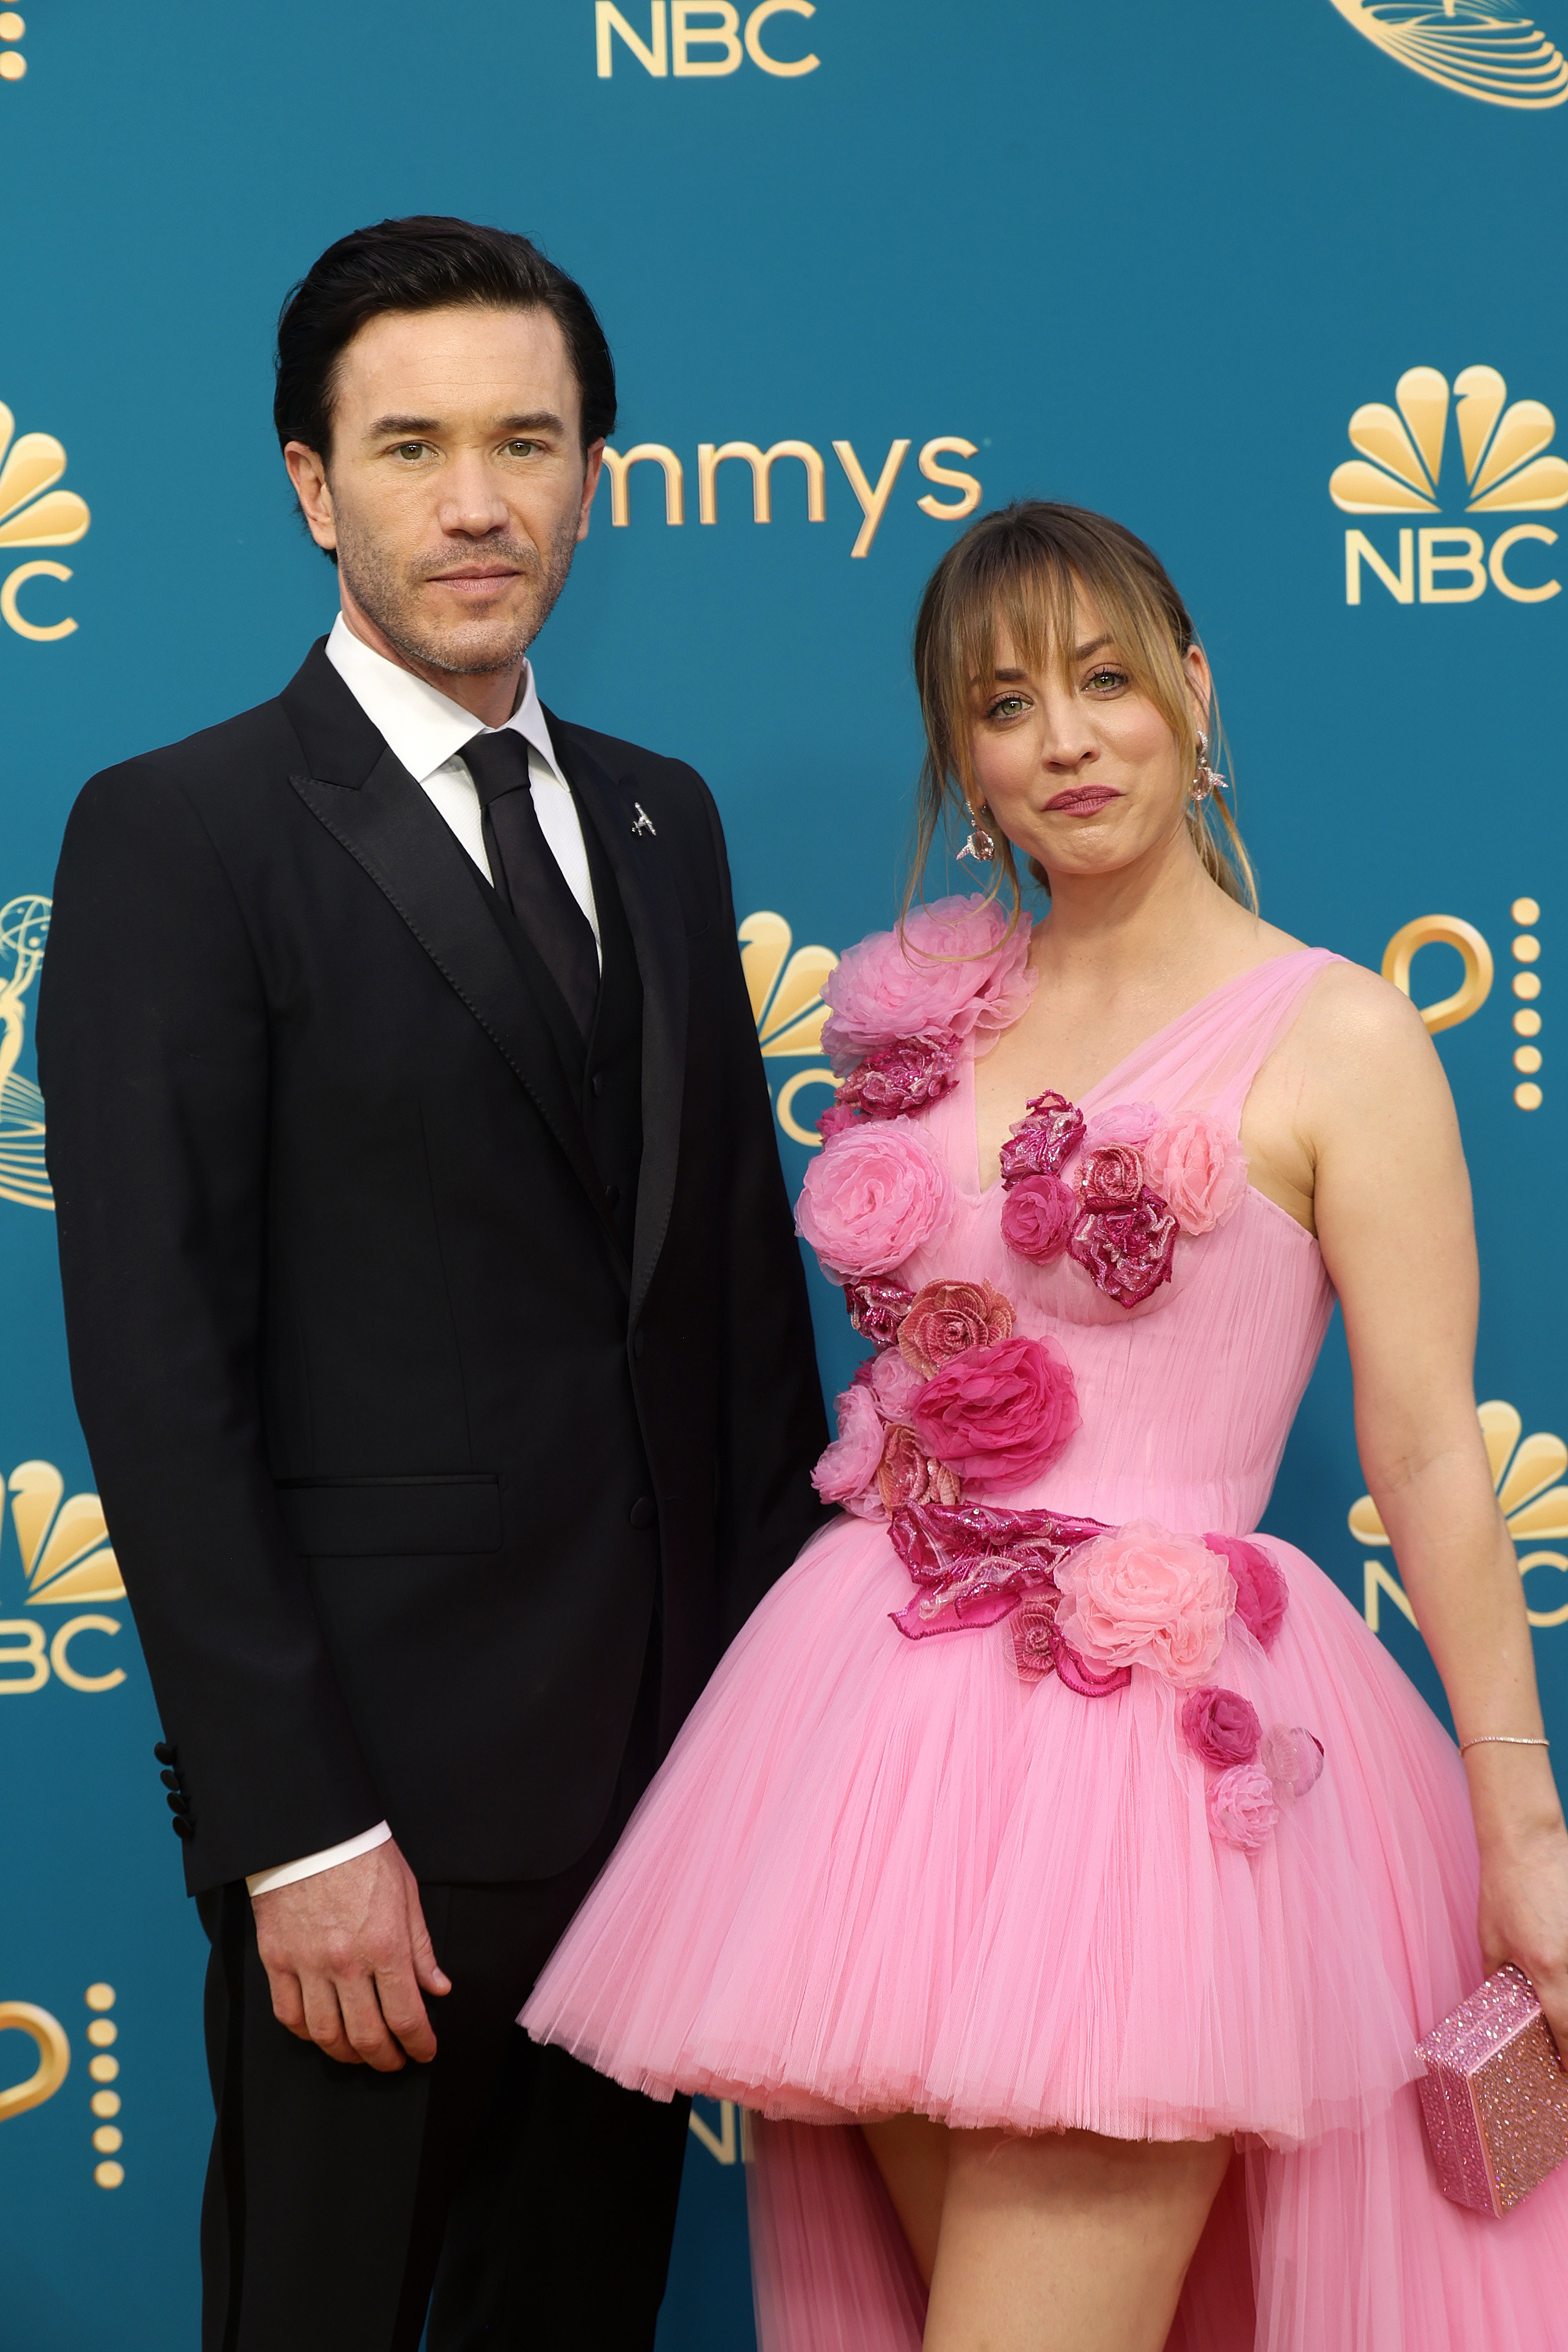 Tom Pelphrey in a black suit and Kaley Cuoco in a short pink dress with a train